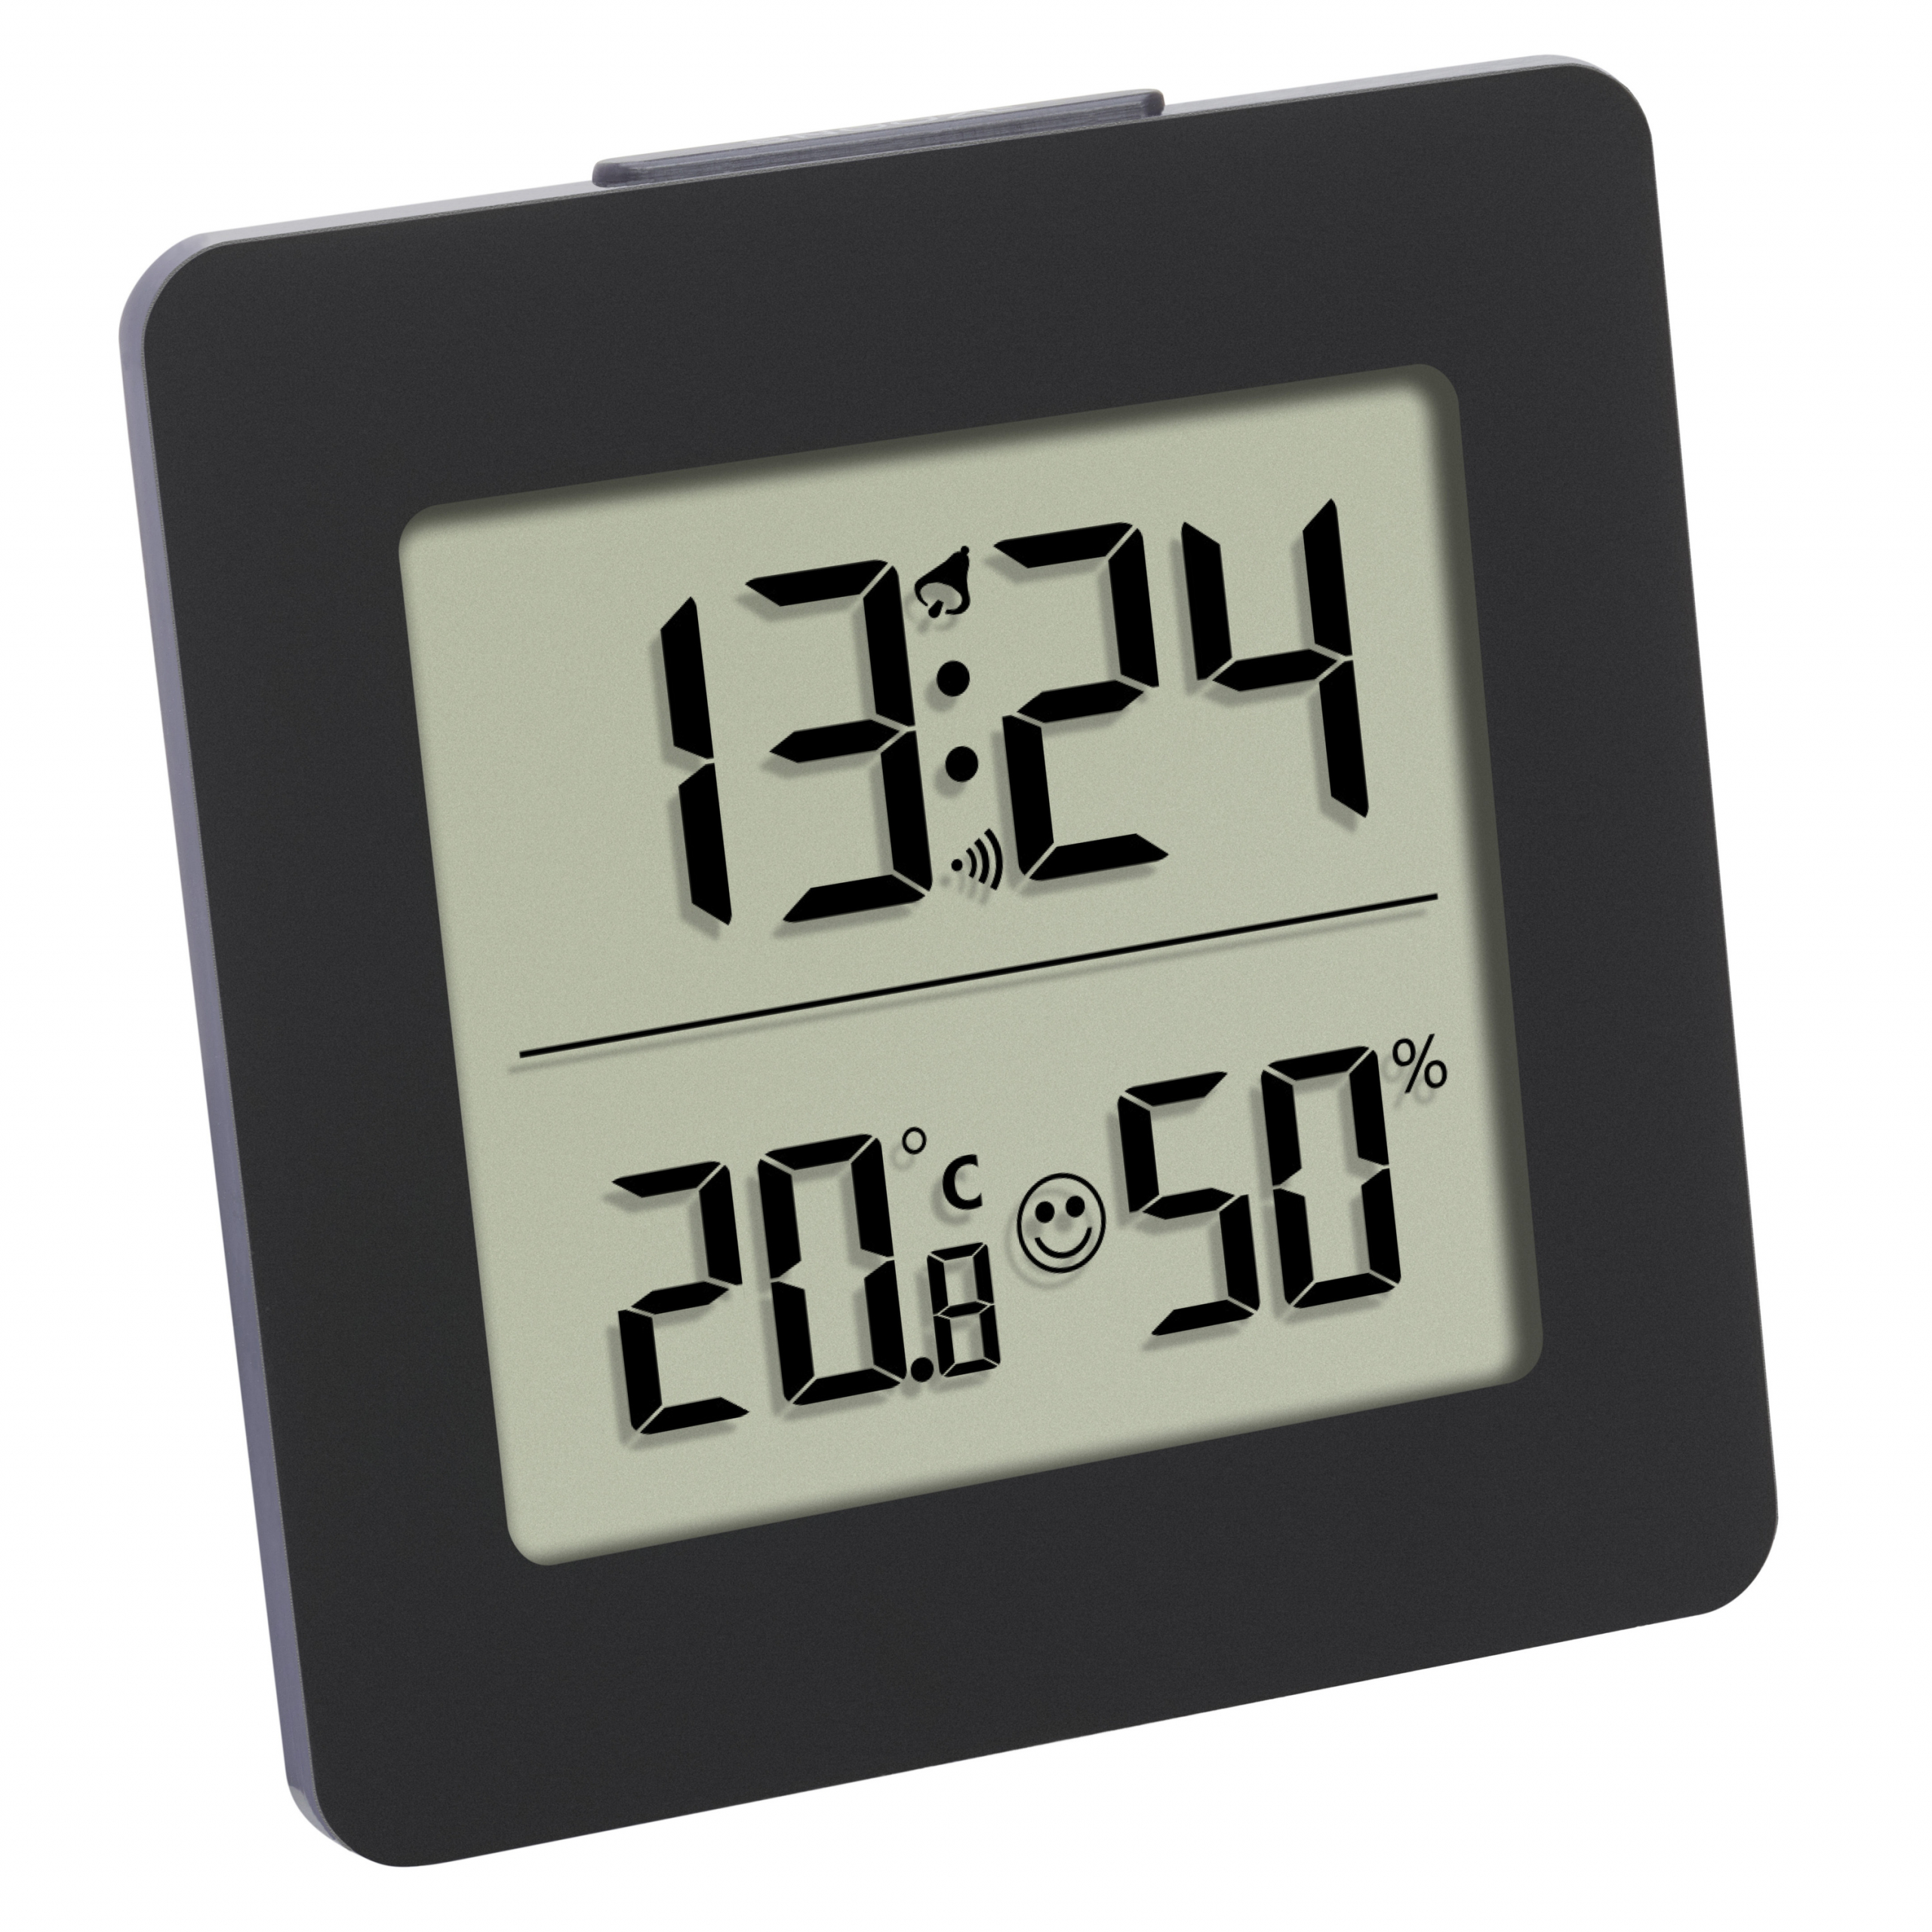 TFA Dostmann 30.5038 Digital Thermometer Hygrometer Climate Control black with Battery